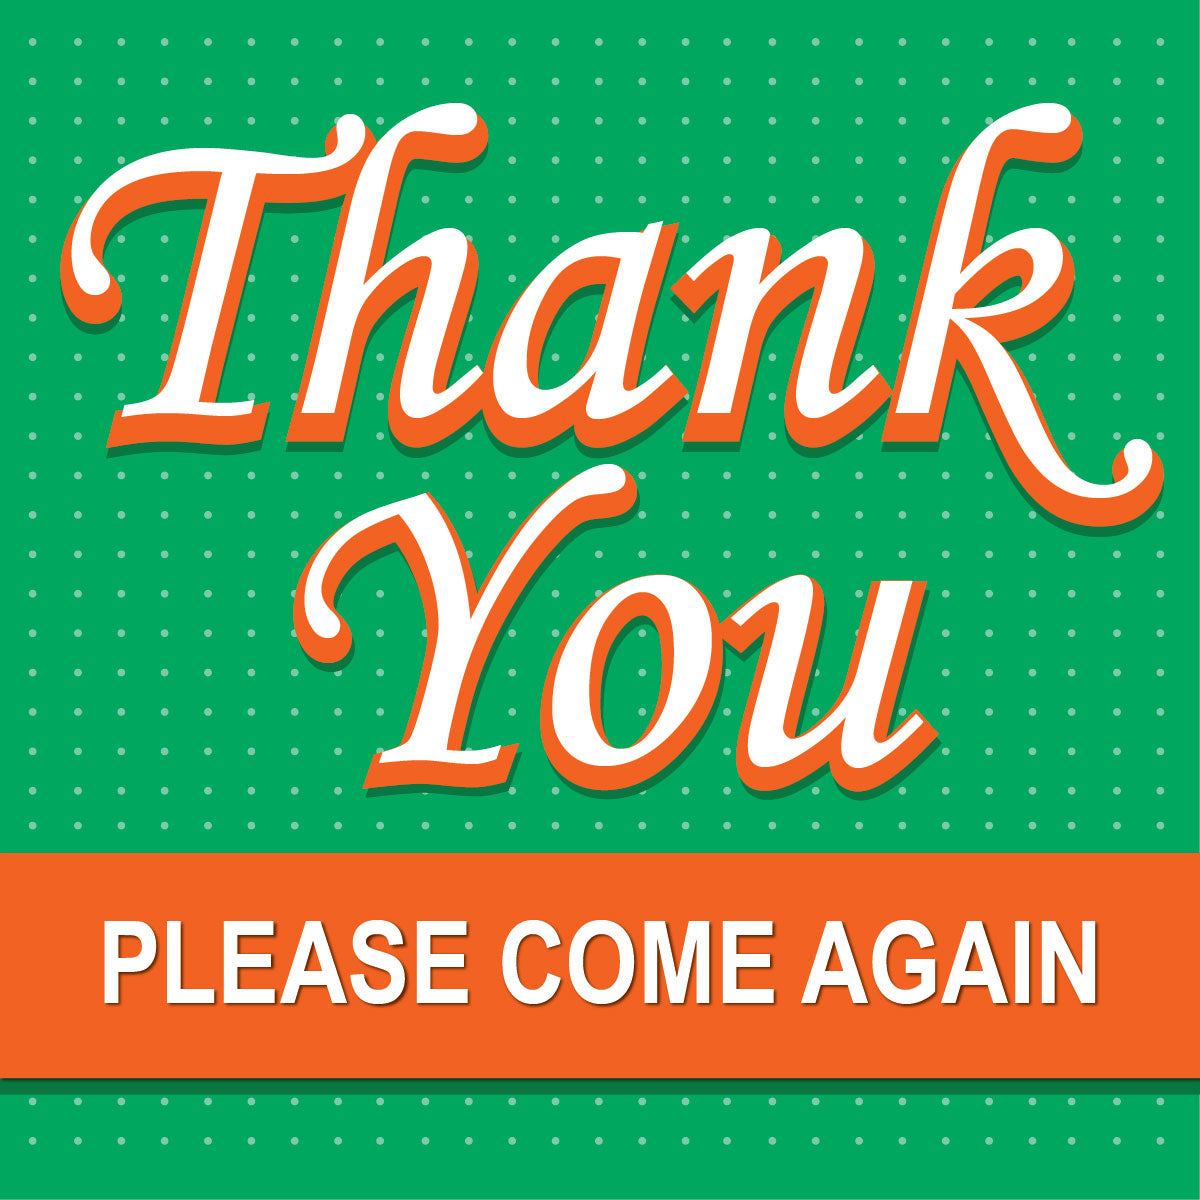 Thank You Please Come Again Sign - 8" x 8"